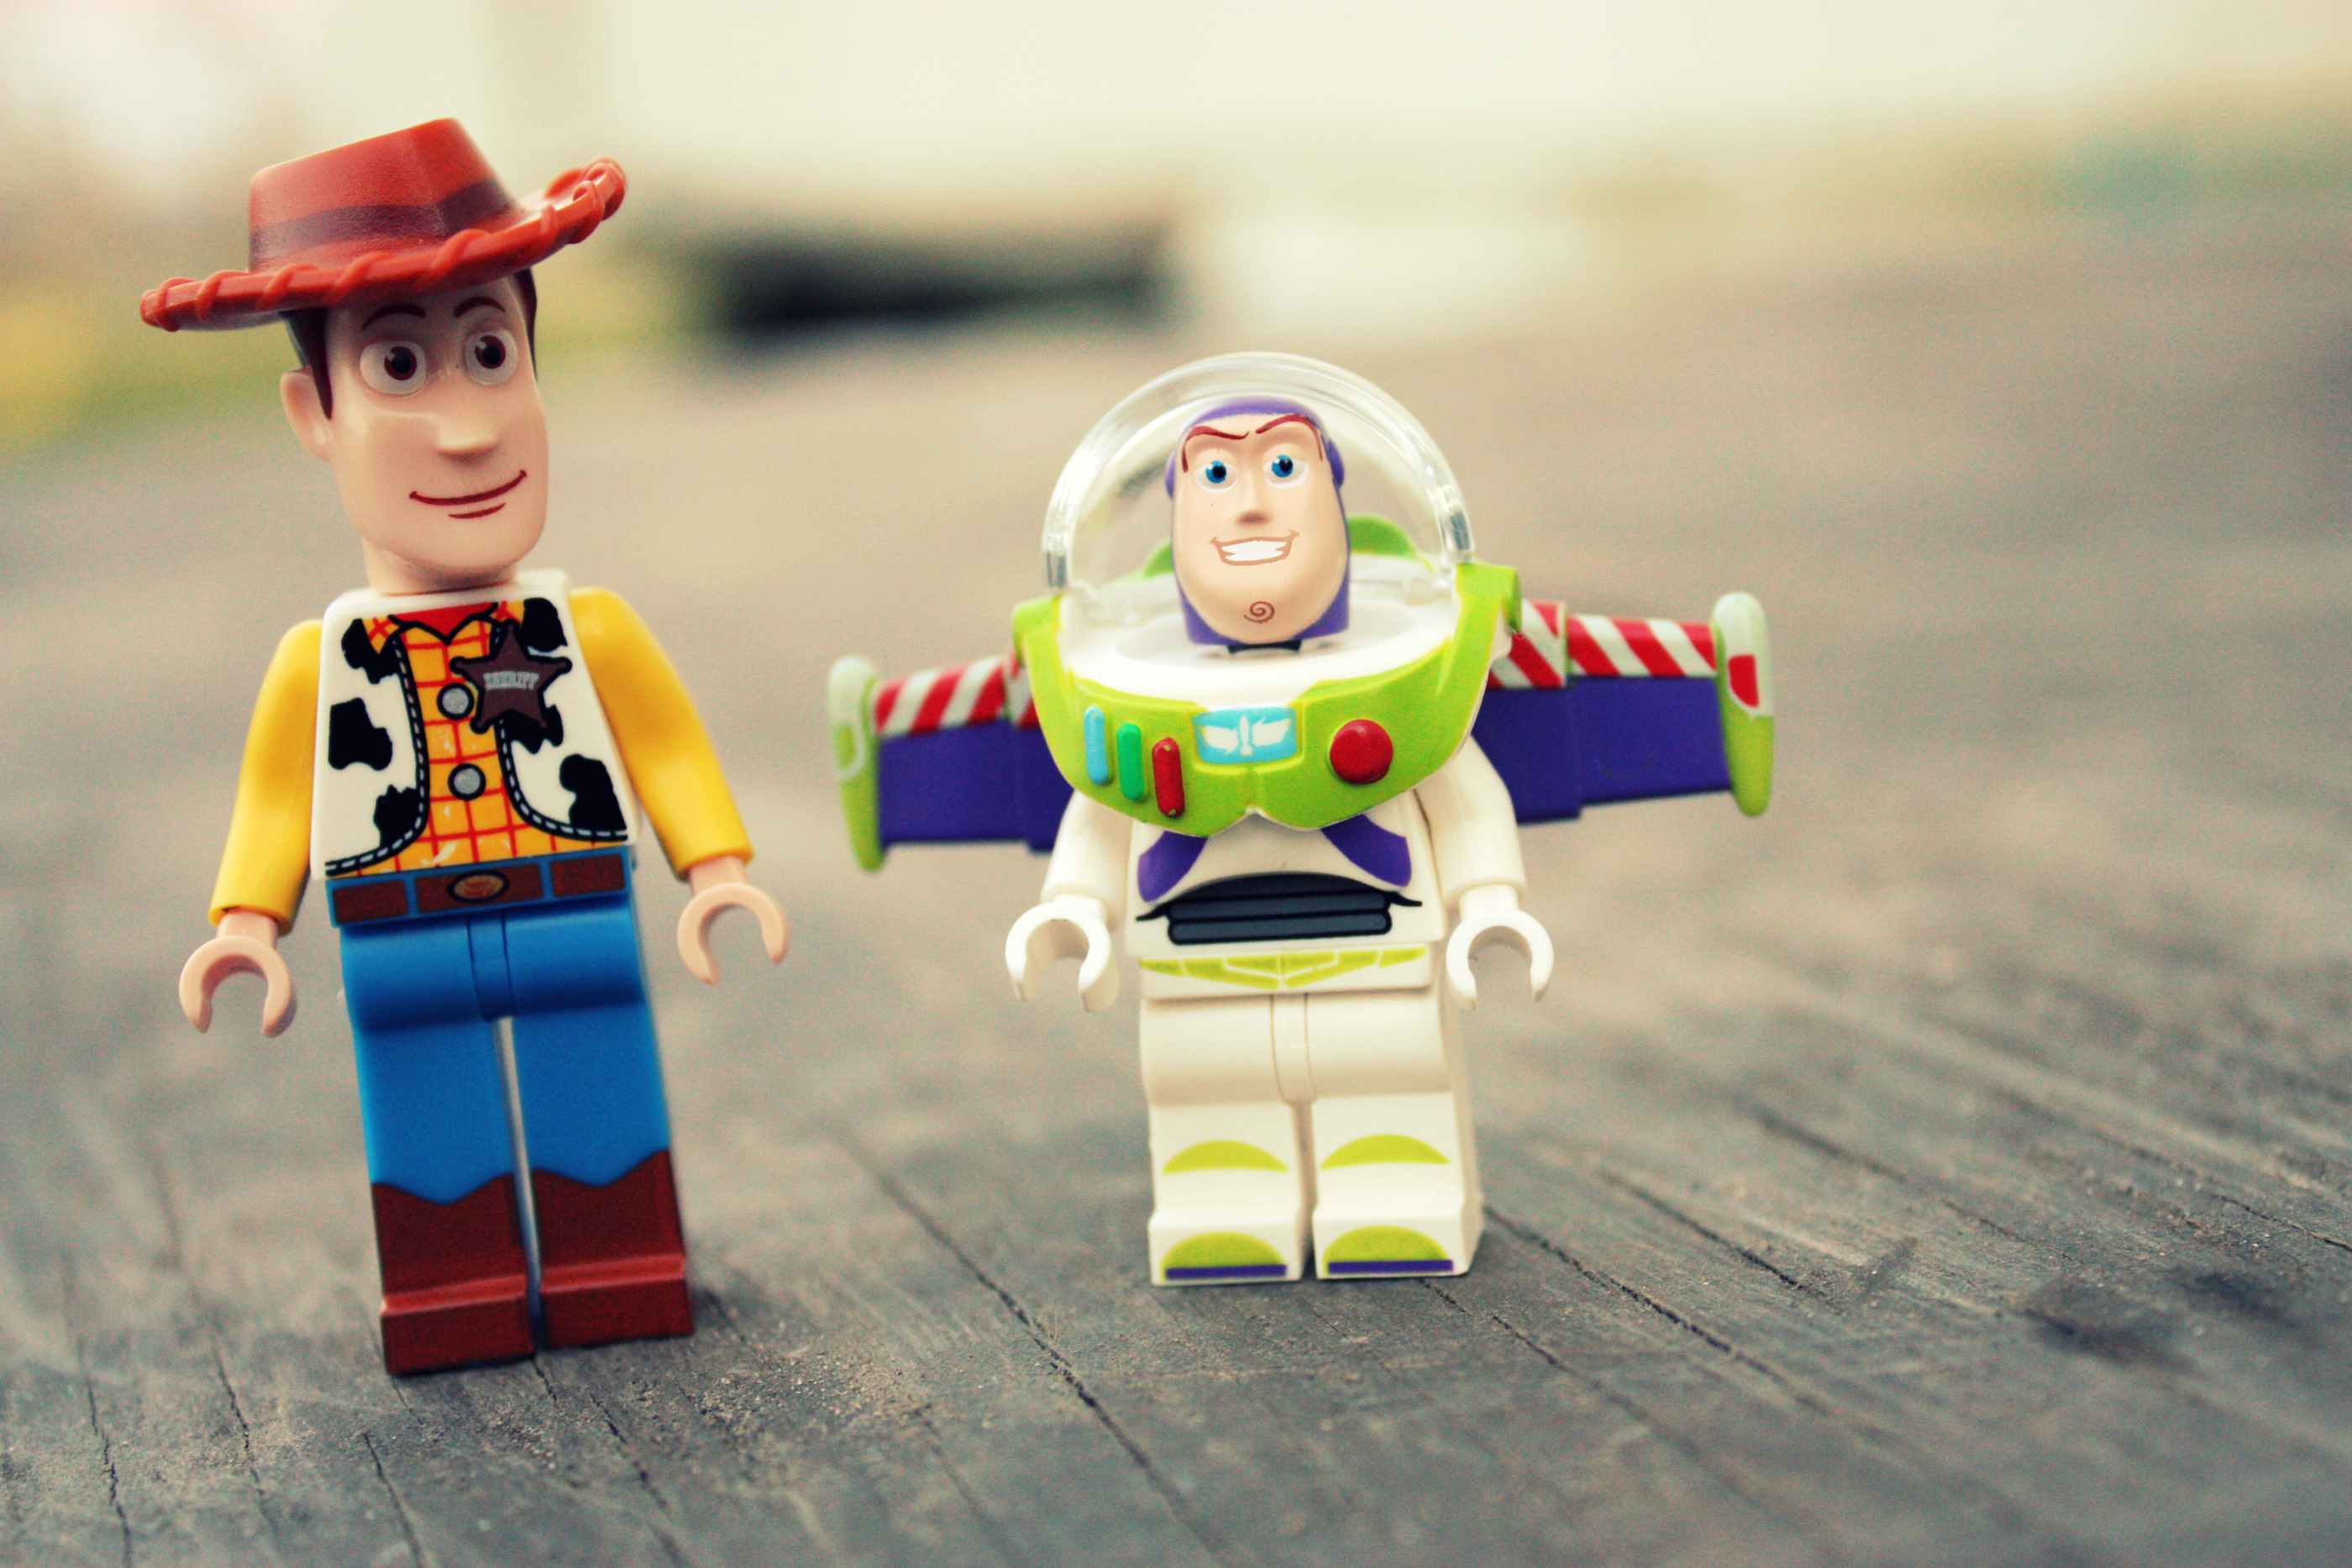 lego toys of Woody and Buzz from Toy Story